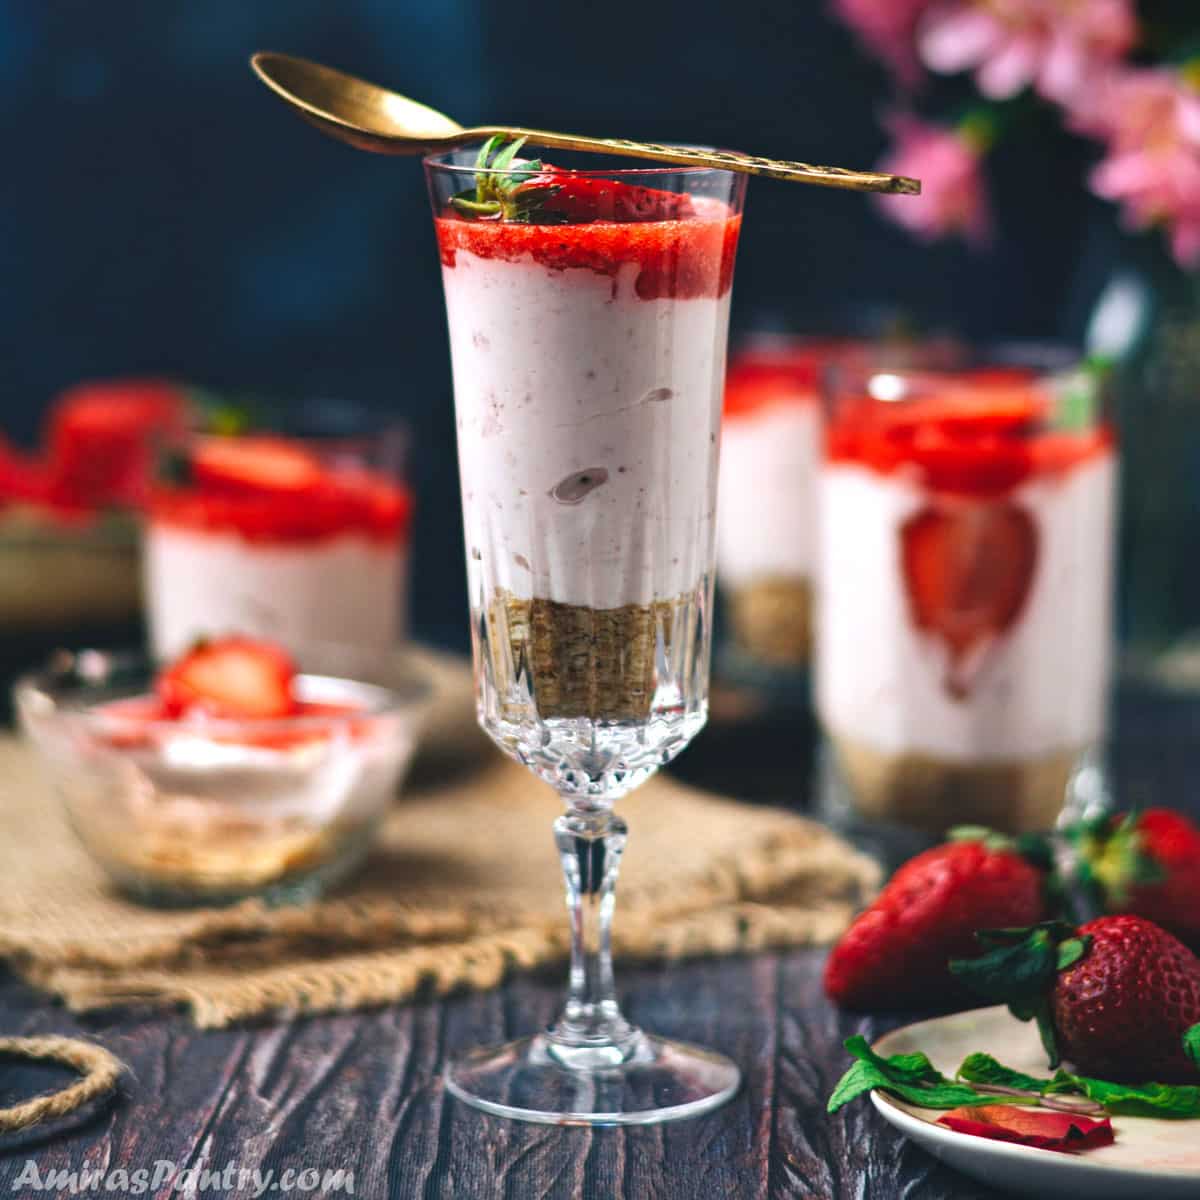 A tall glass of strawberry cheese cake with a golden spoon resting on its top.